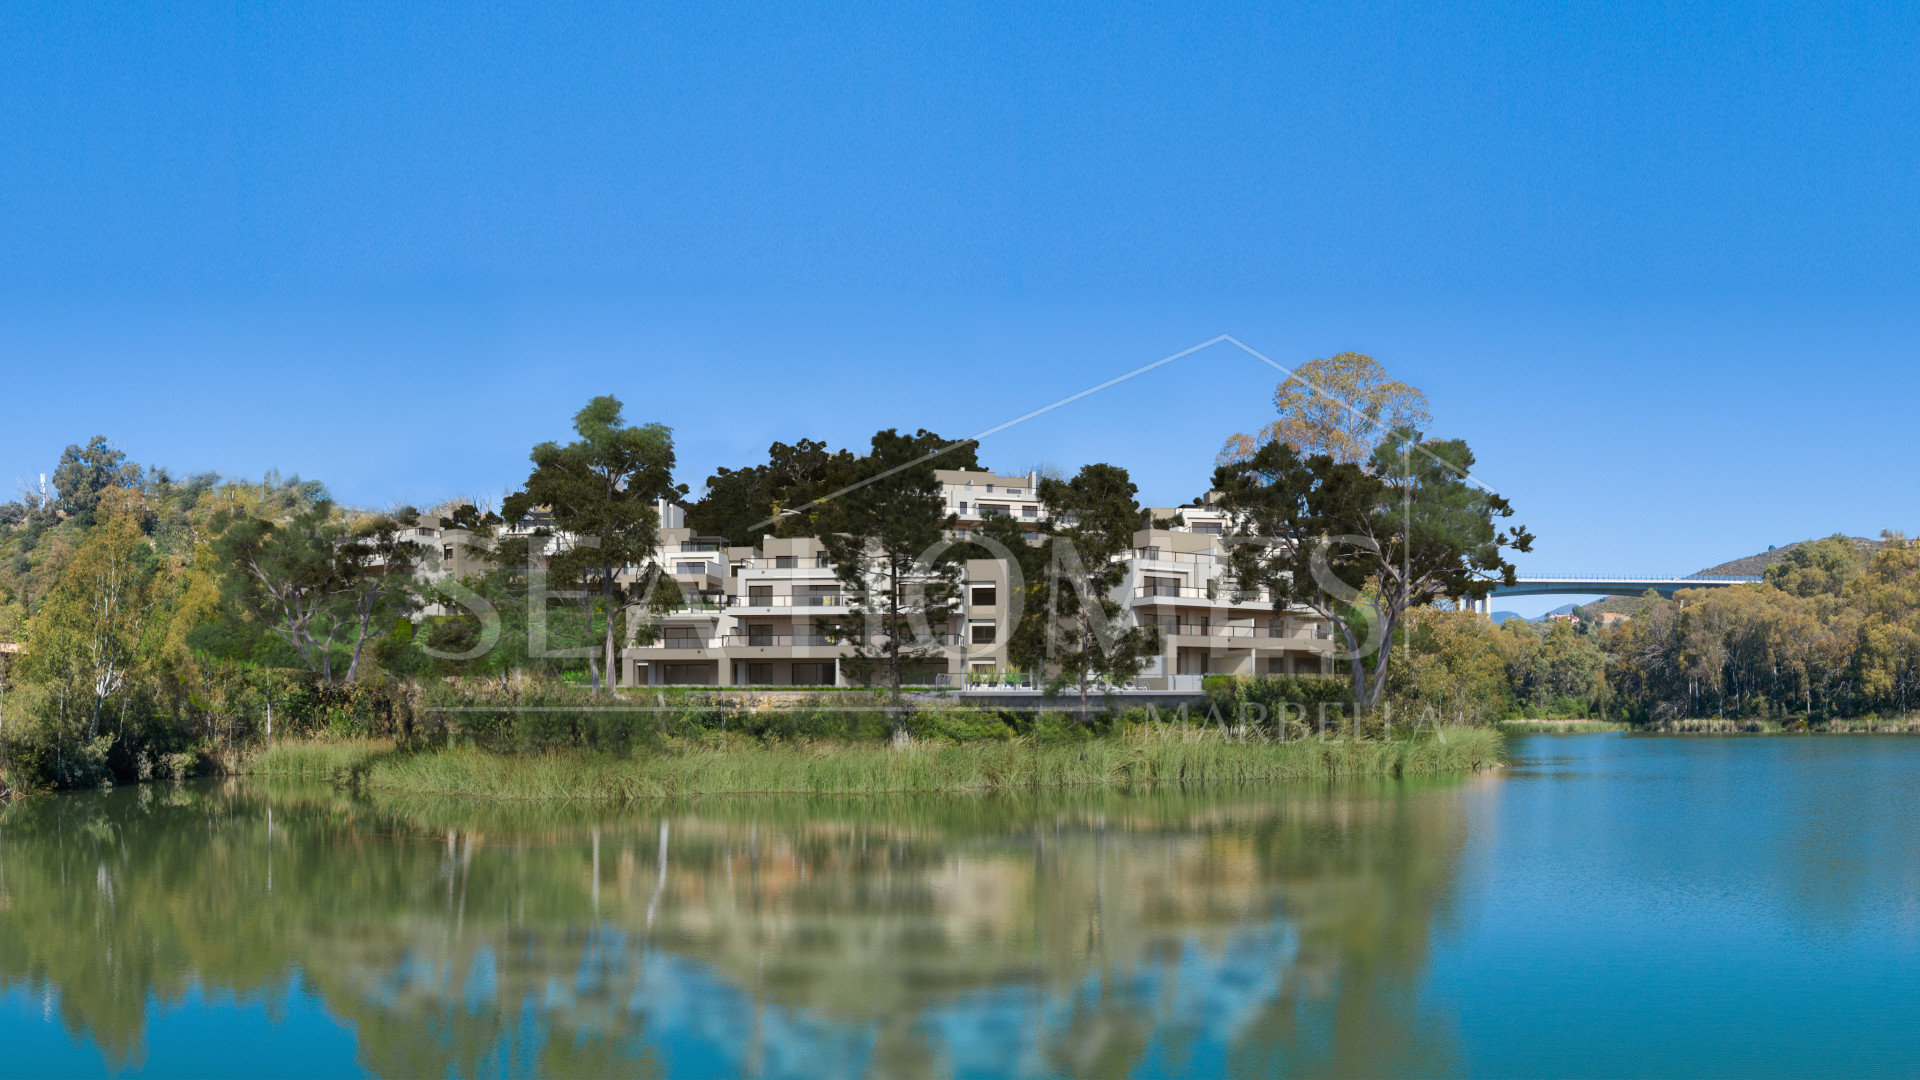 Marbella Lake, a modern development at the heart of Golf Valley in Nueva Andalucía.